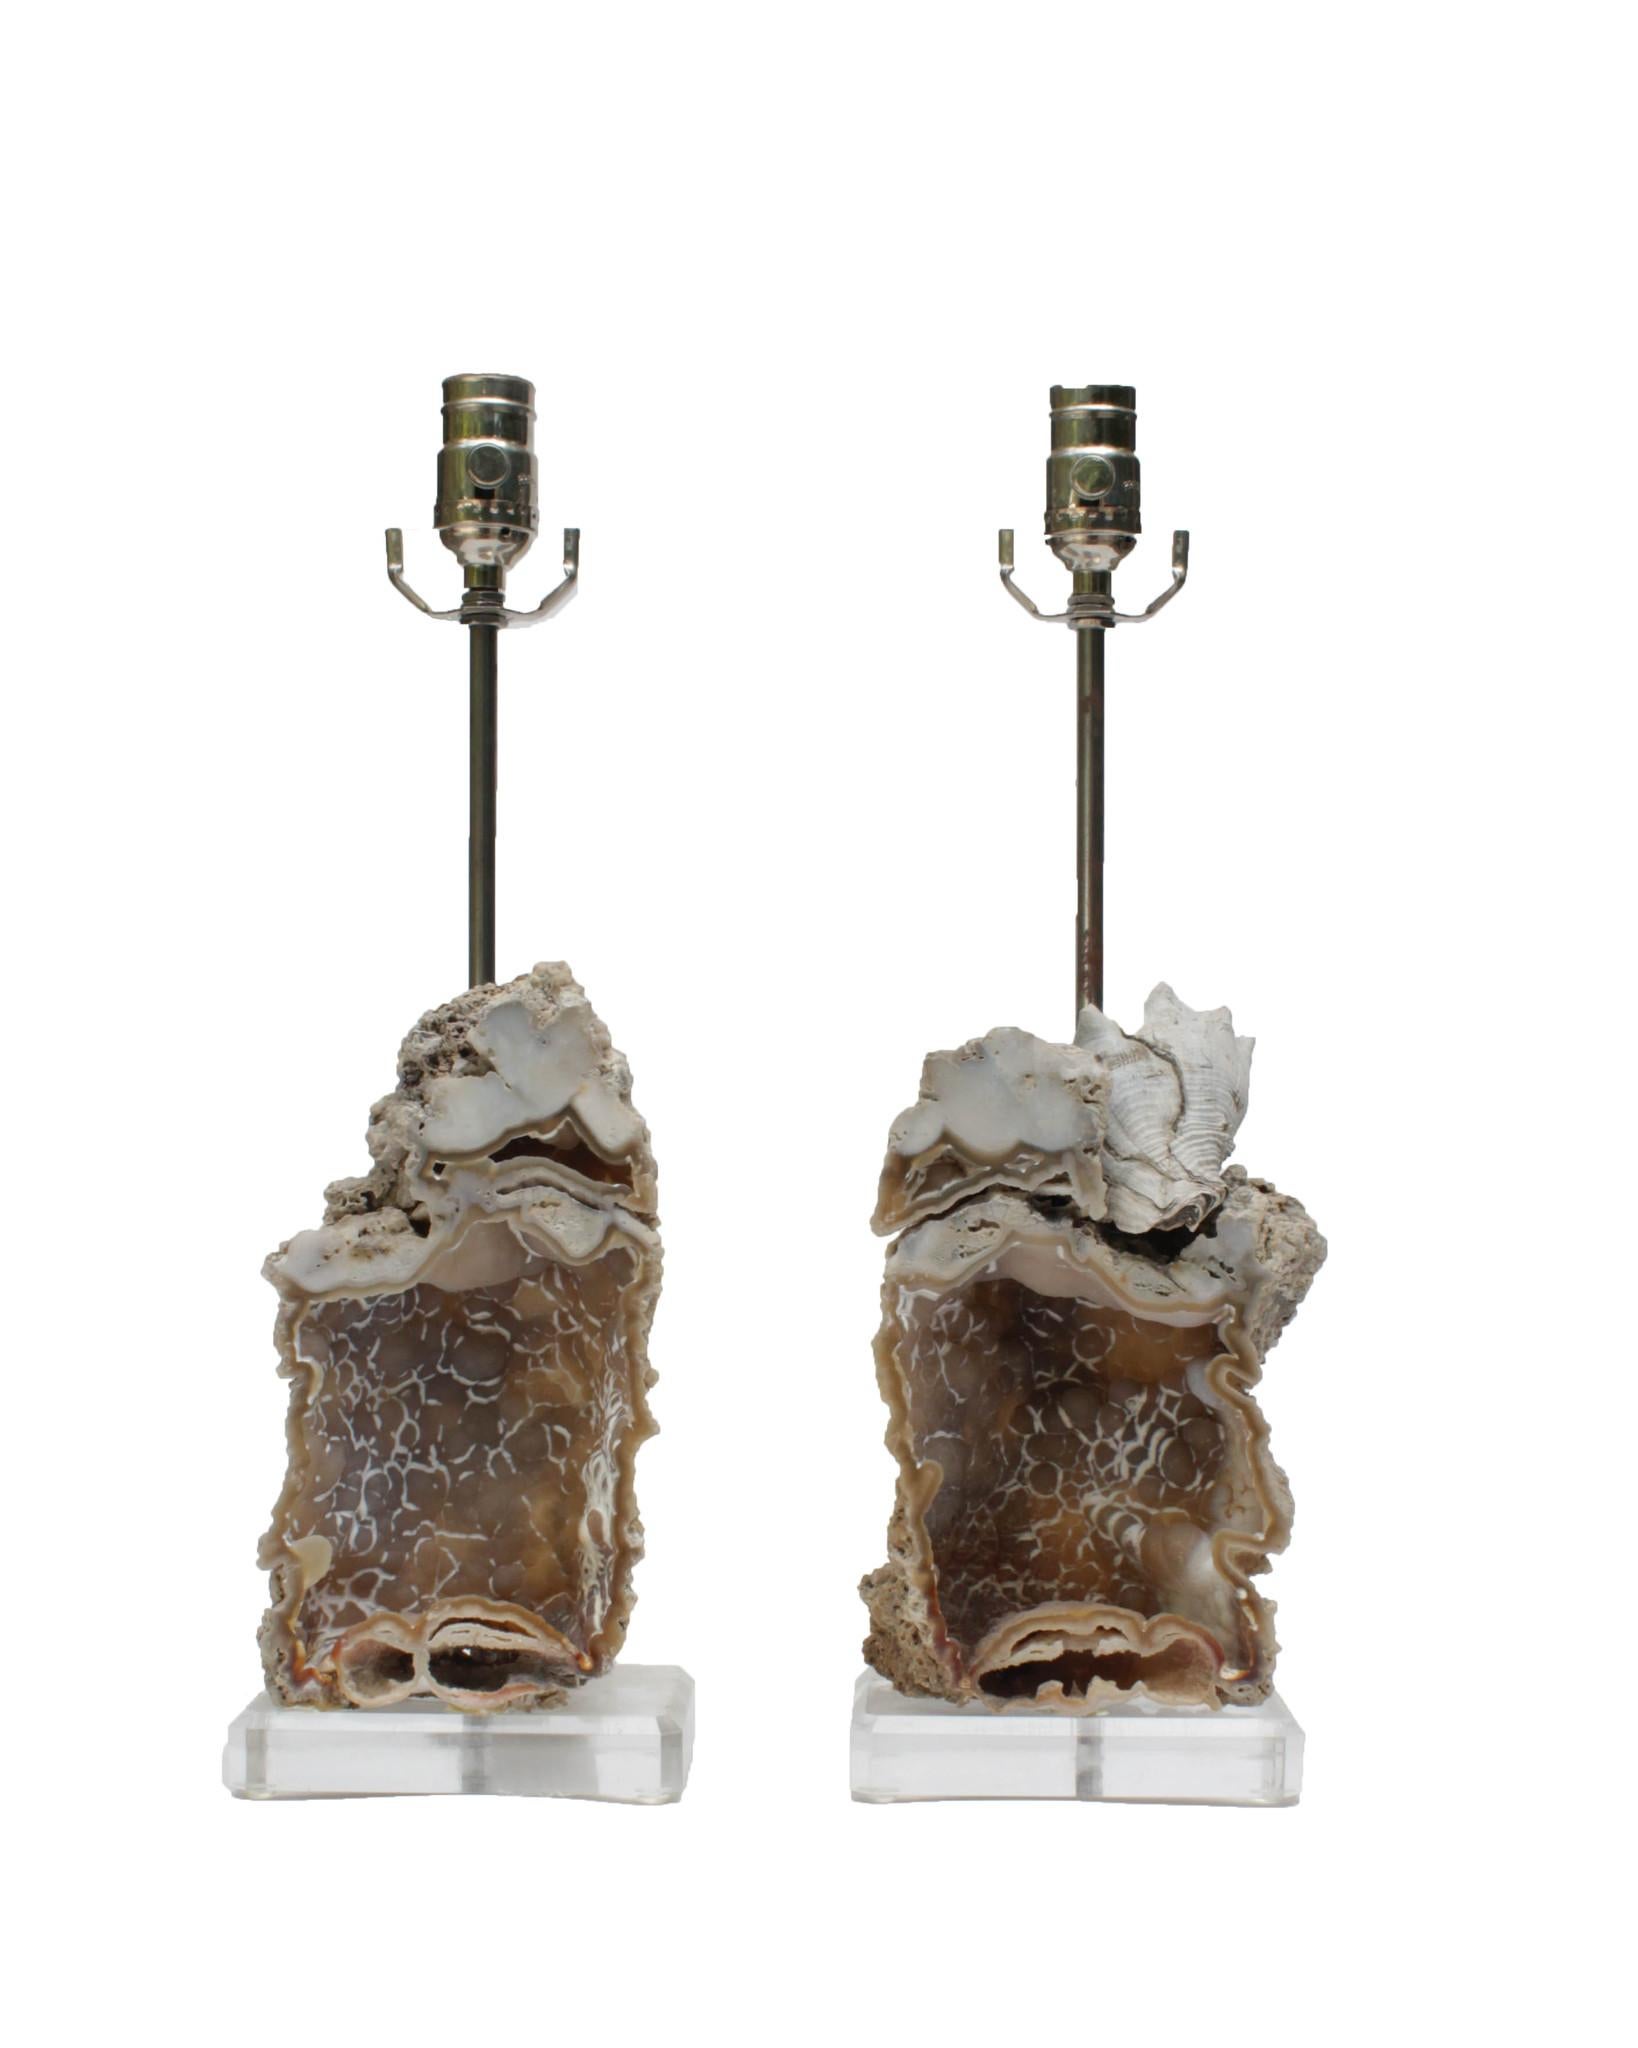 Pair of fossil agate coral lamps with a fossil shell mounted on lucite. 

Fossil agate coral is Florida's state stone and is known for its unique formation that can take place over 20 million years. It's a natural gemstone that is created when